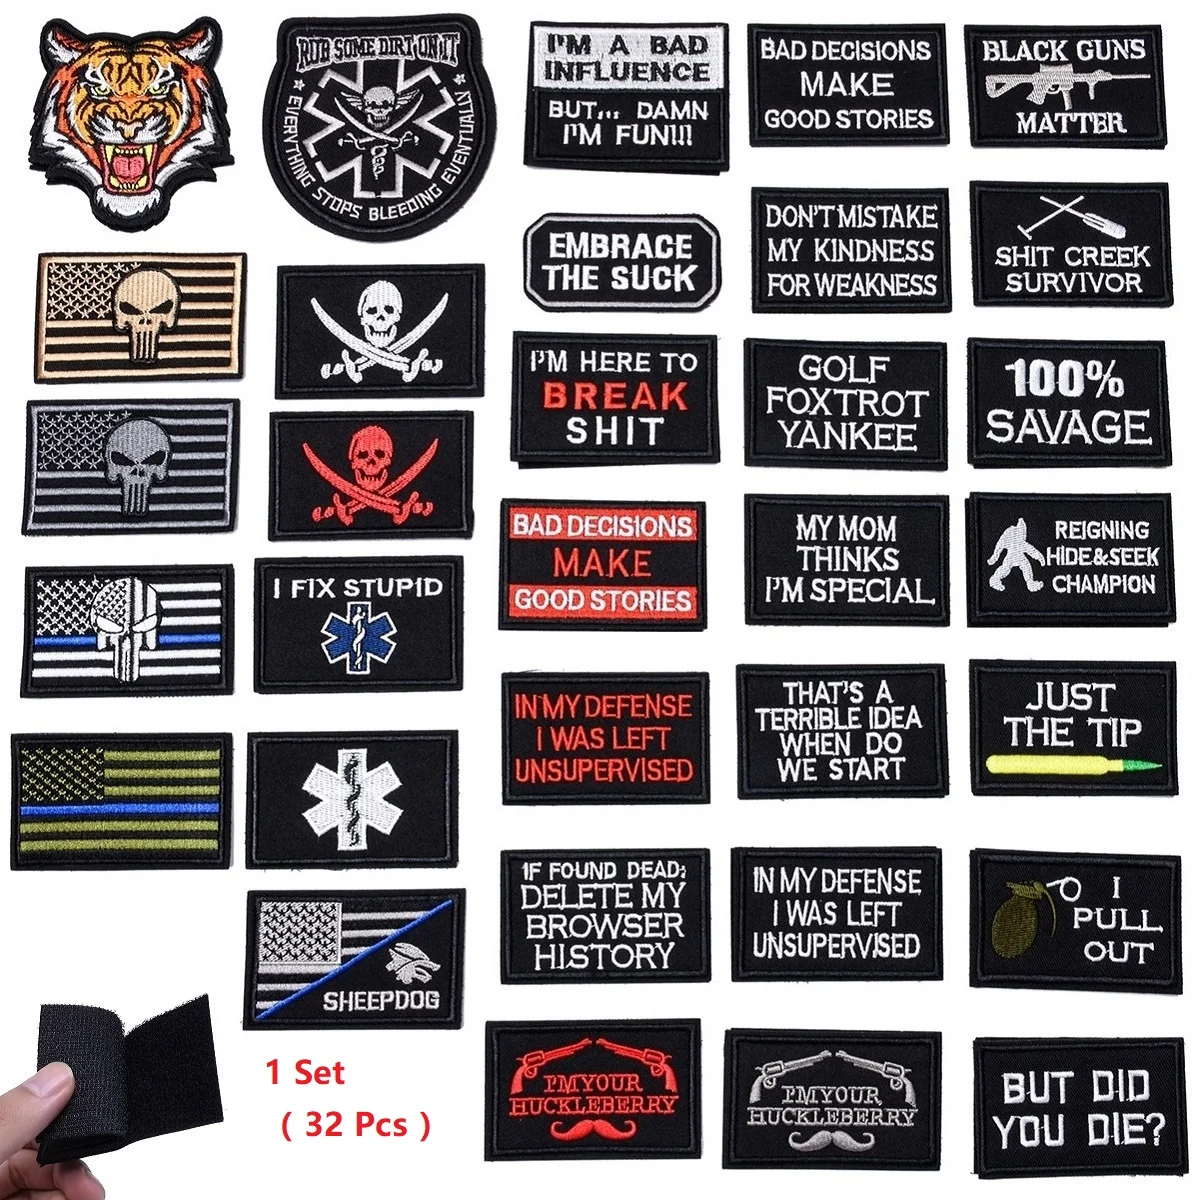 

32Pcs Tactical Morale Slogans US ARMY Military Patches for Clothes Embroidered Stickers on Backpack Badge Hook Loop Applique